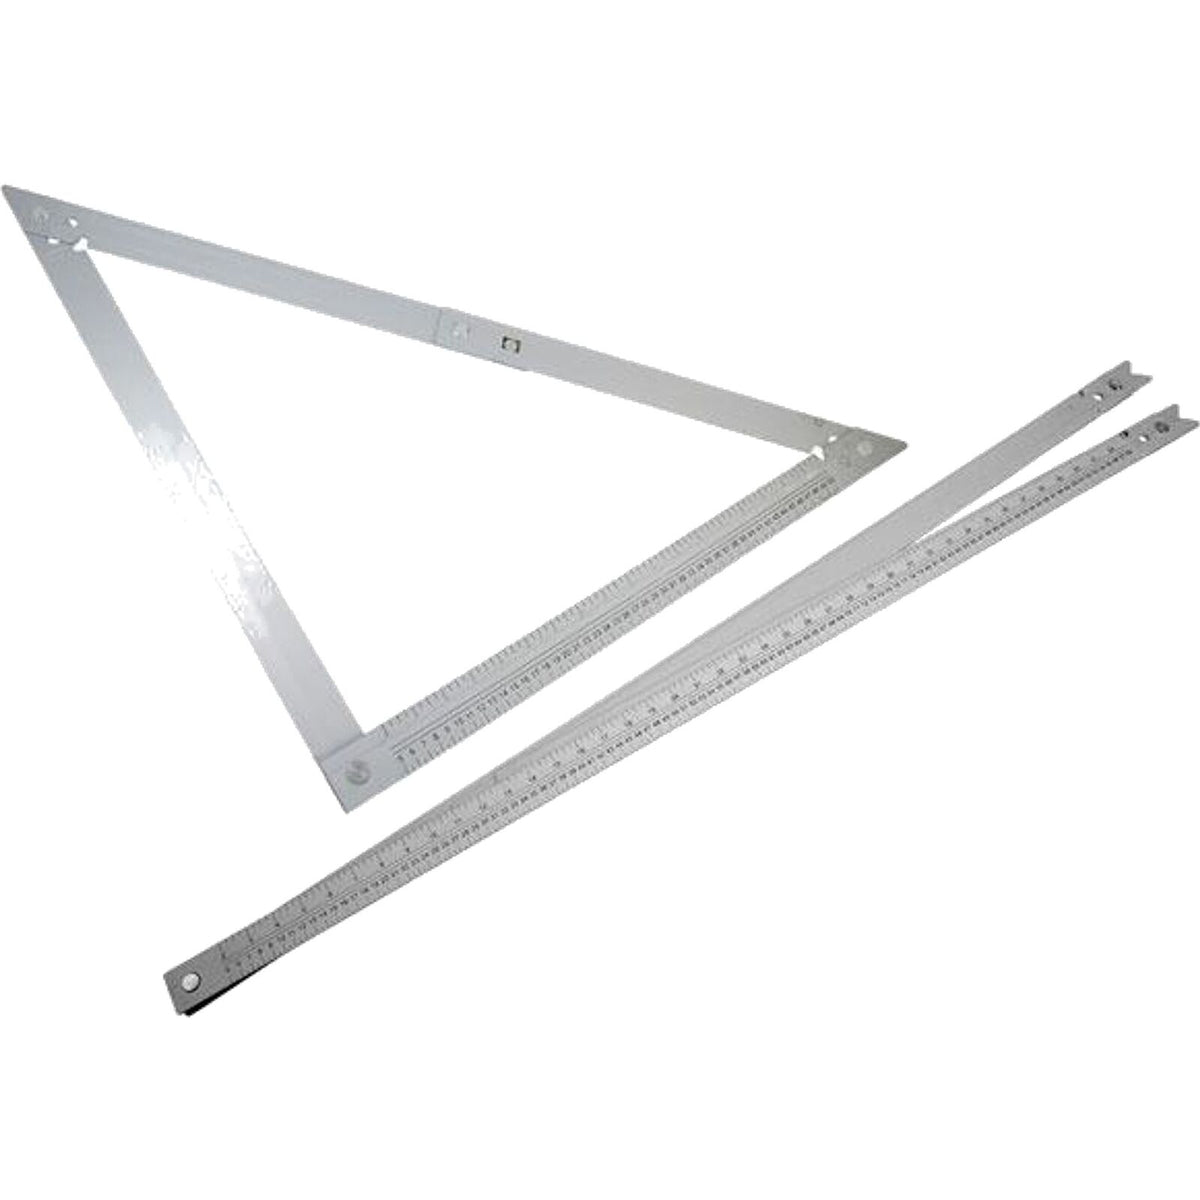 Neilsen Folding Framing Square Carpenters Steel 1200mm Rafters Metric Imperial